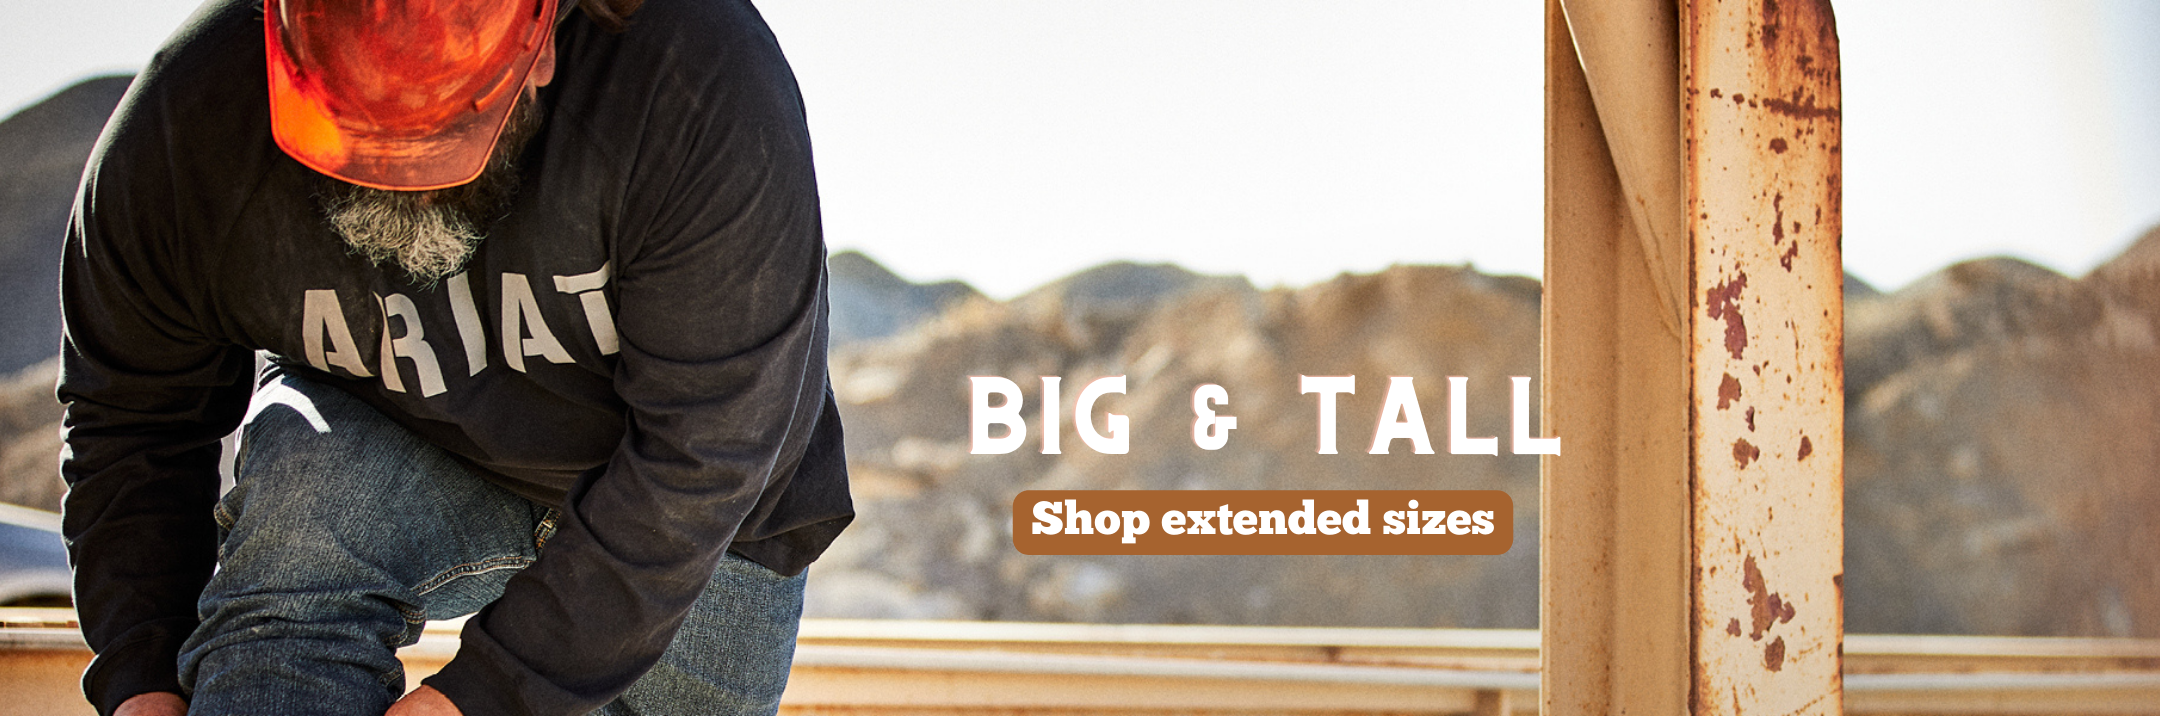 How to Start a Big and Tall Store